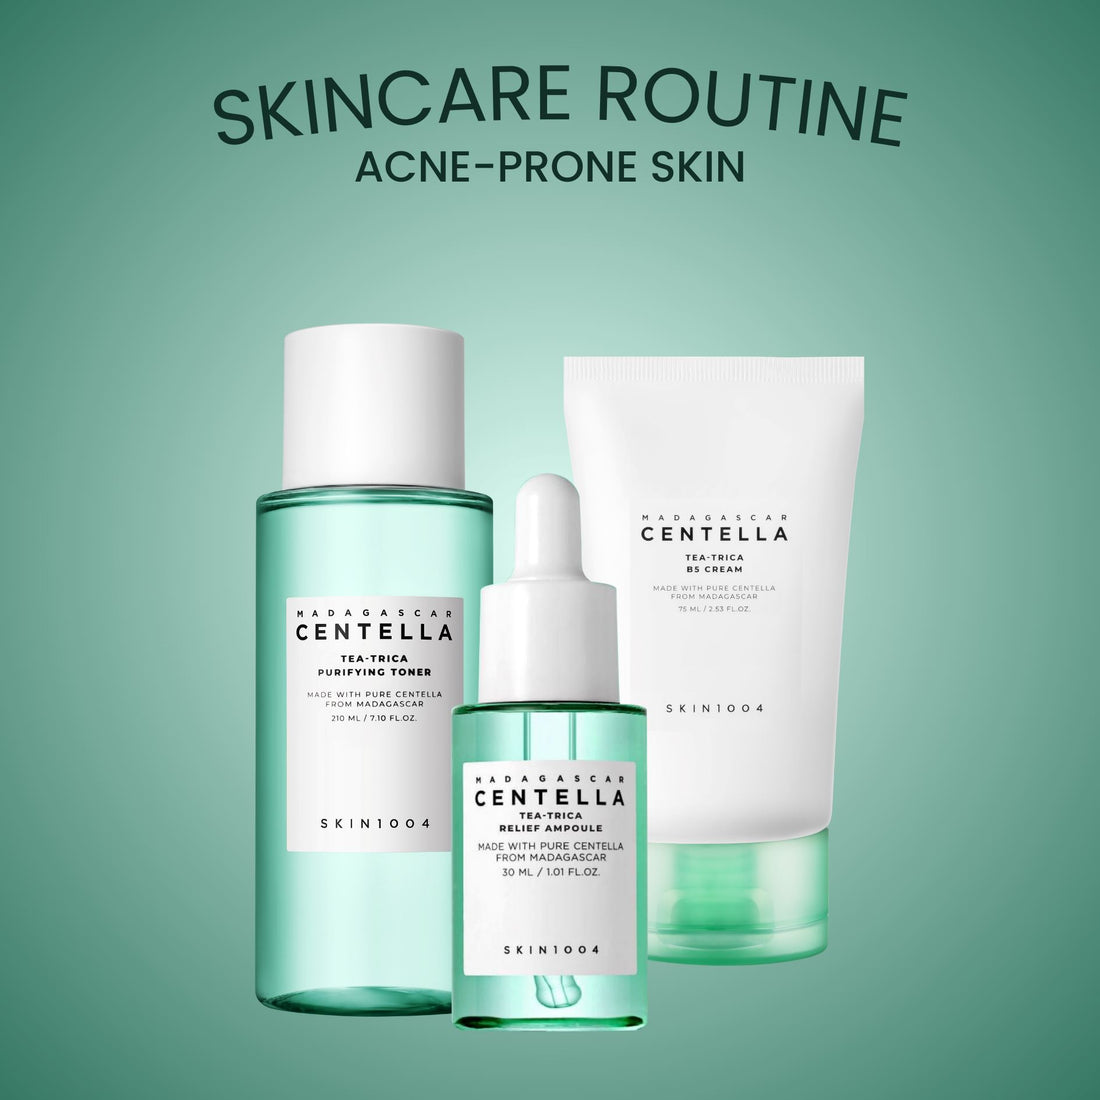 SKIN1004 Routine for Acne-prone Skin, at Orion Beauty. SKIN1004 Official Sole Authorized Retailer in Sri Lanka!